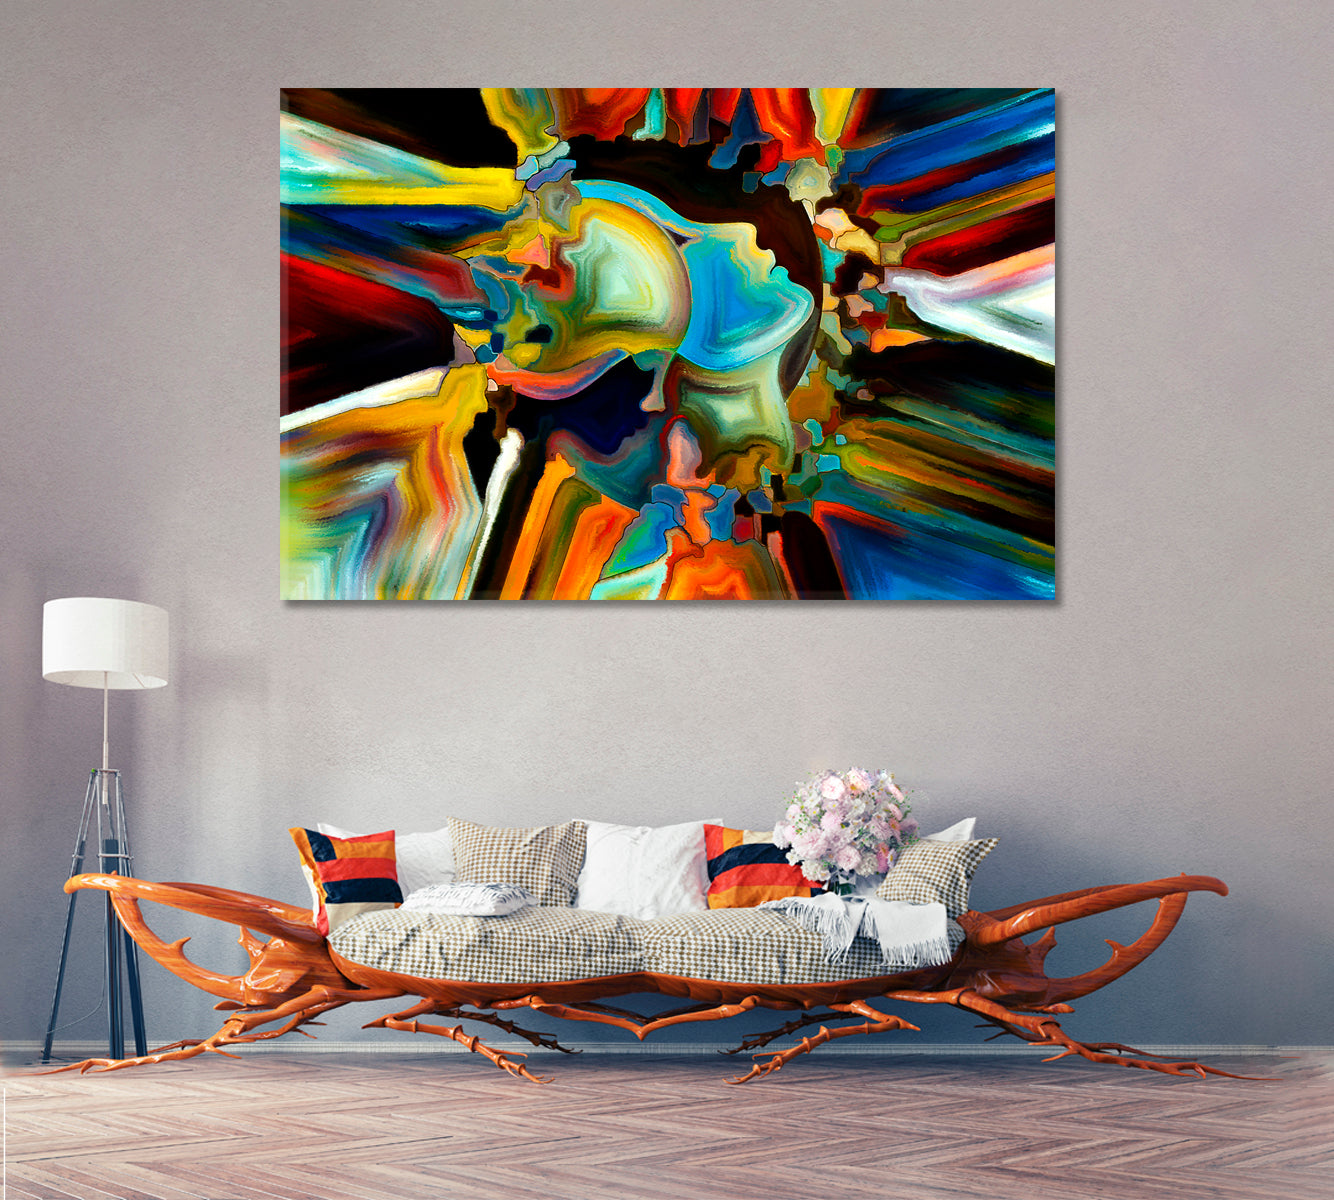 Man And Woman and Colorful Abstract Shapes Contemporary Art Artesty 1 panel 24" x 16" 